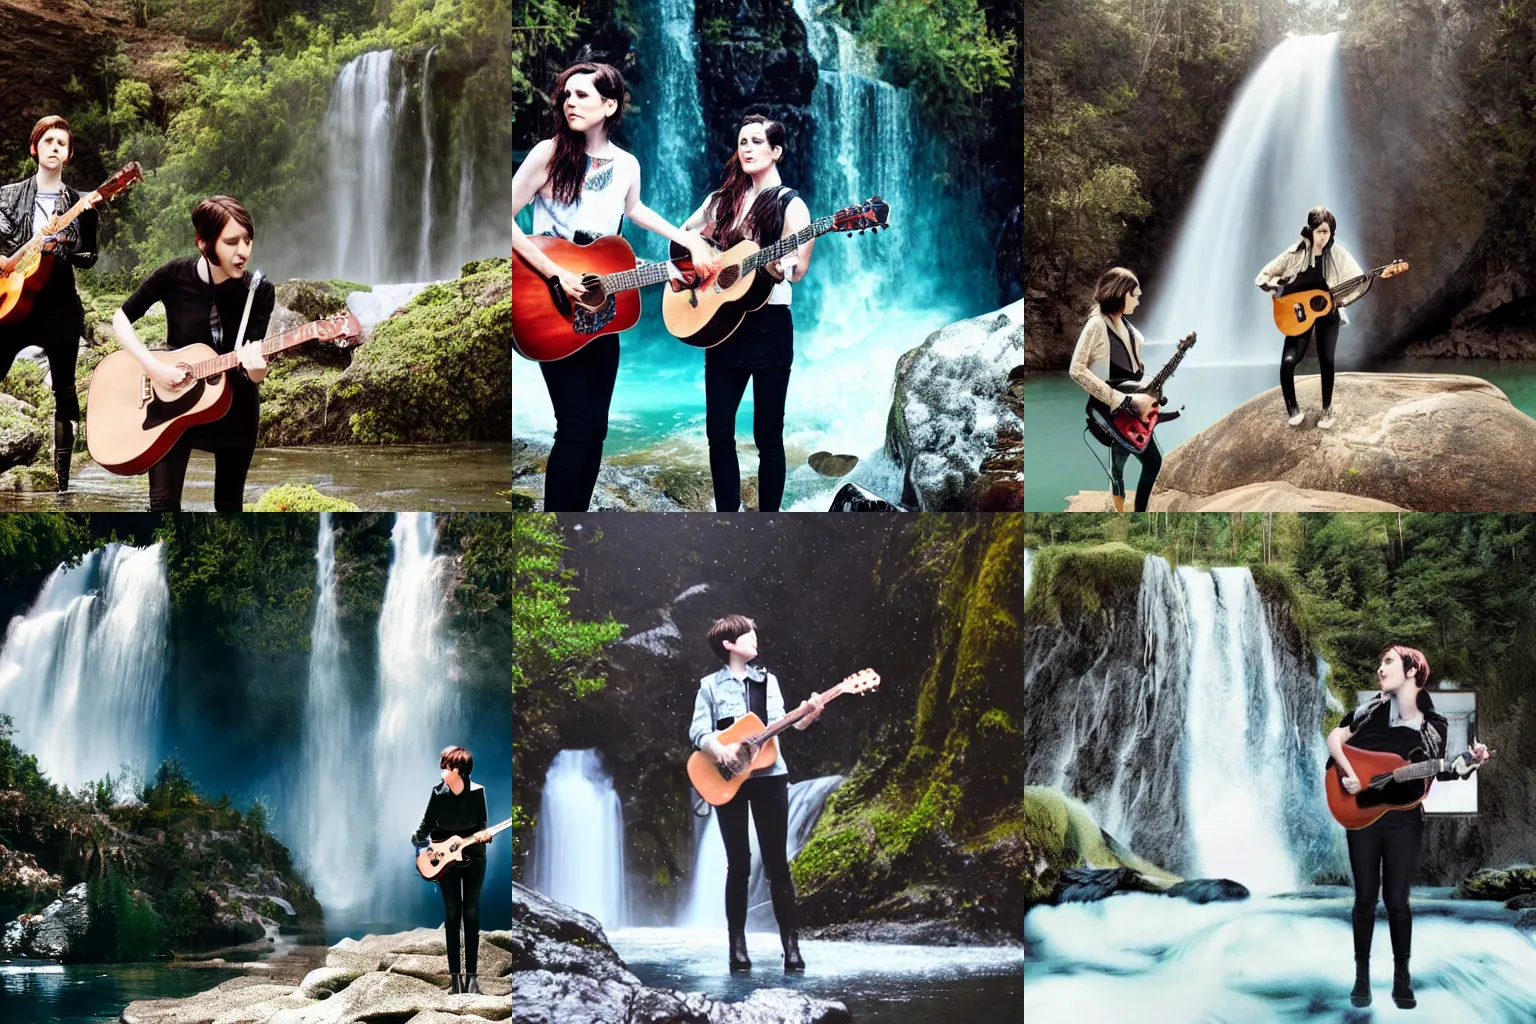 Prompt: tegan and sara playing guitar while standing in a waterfall, fantasy style